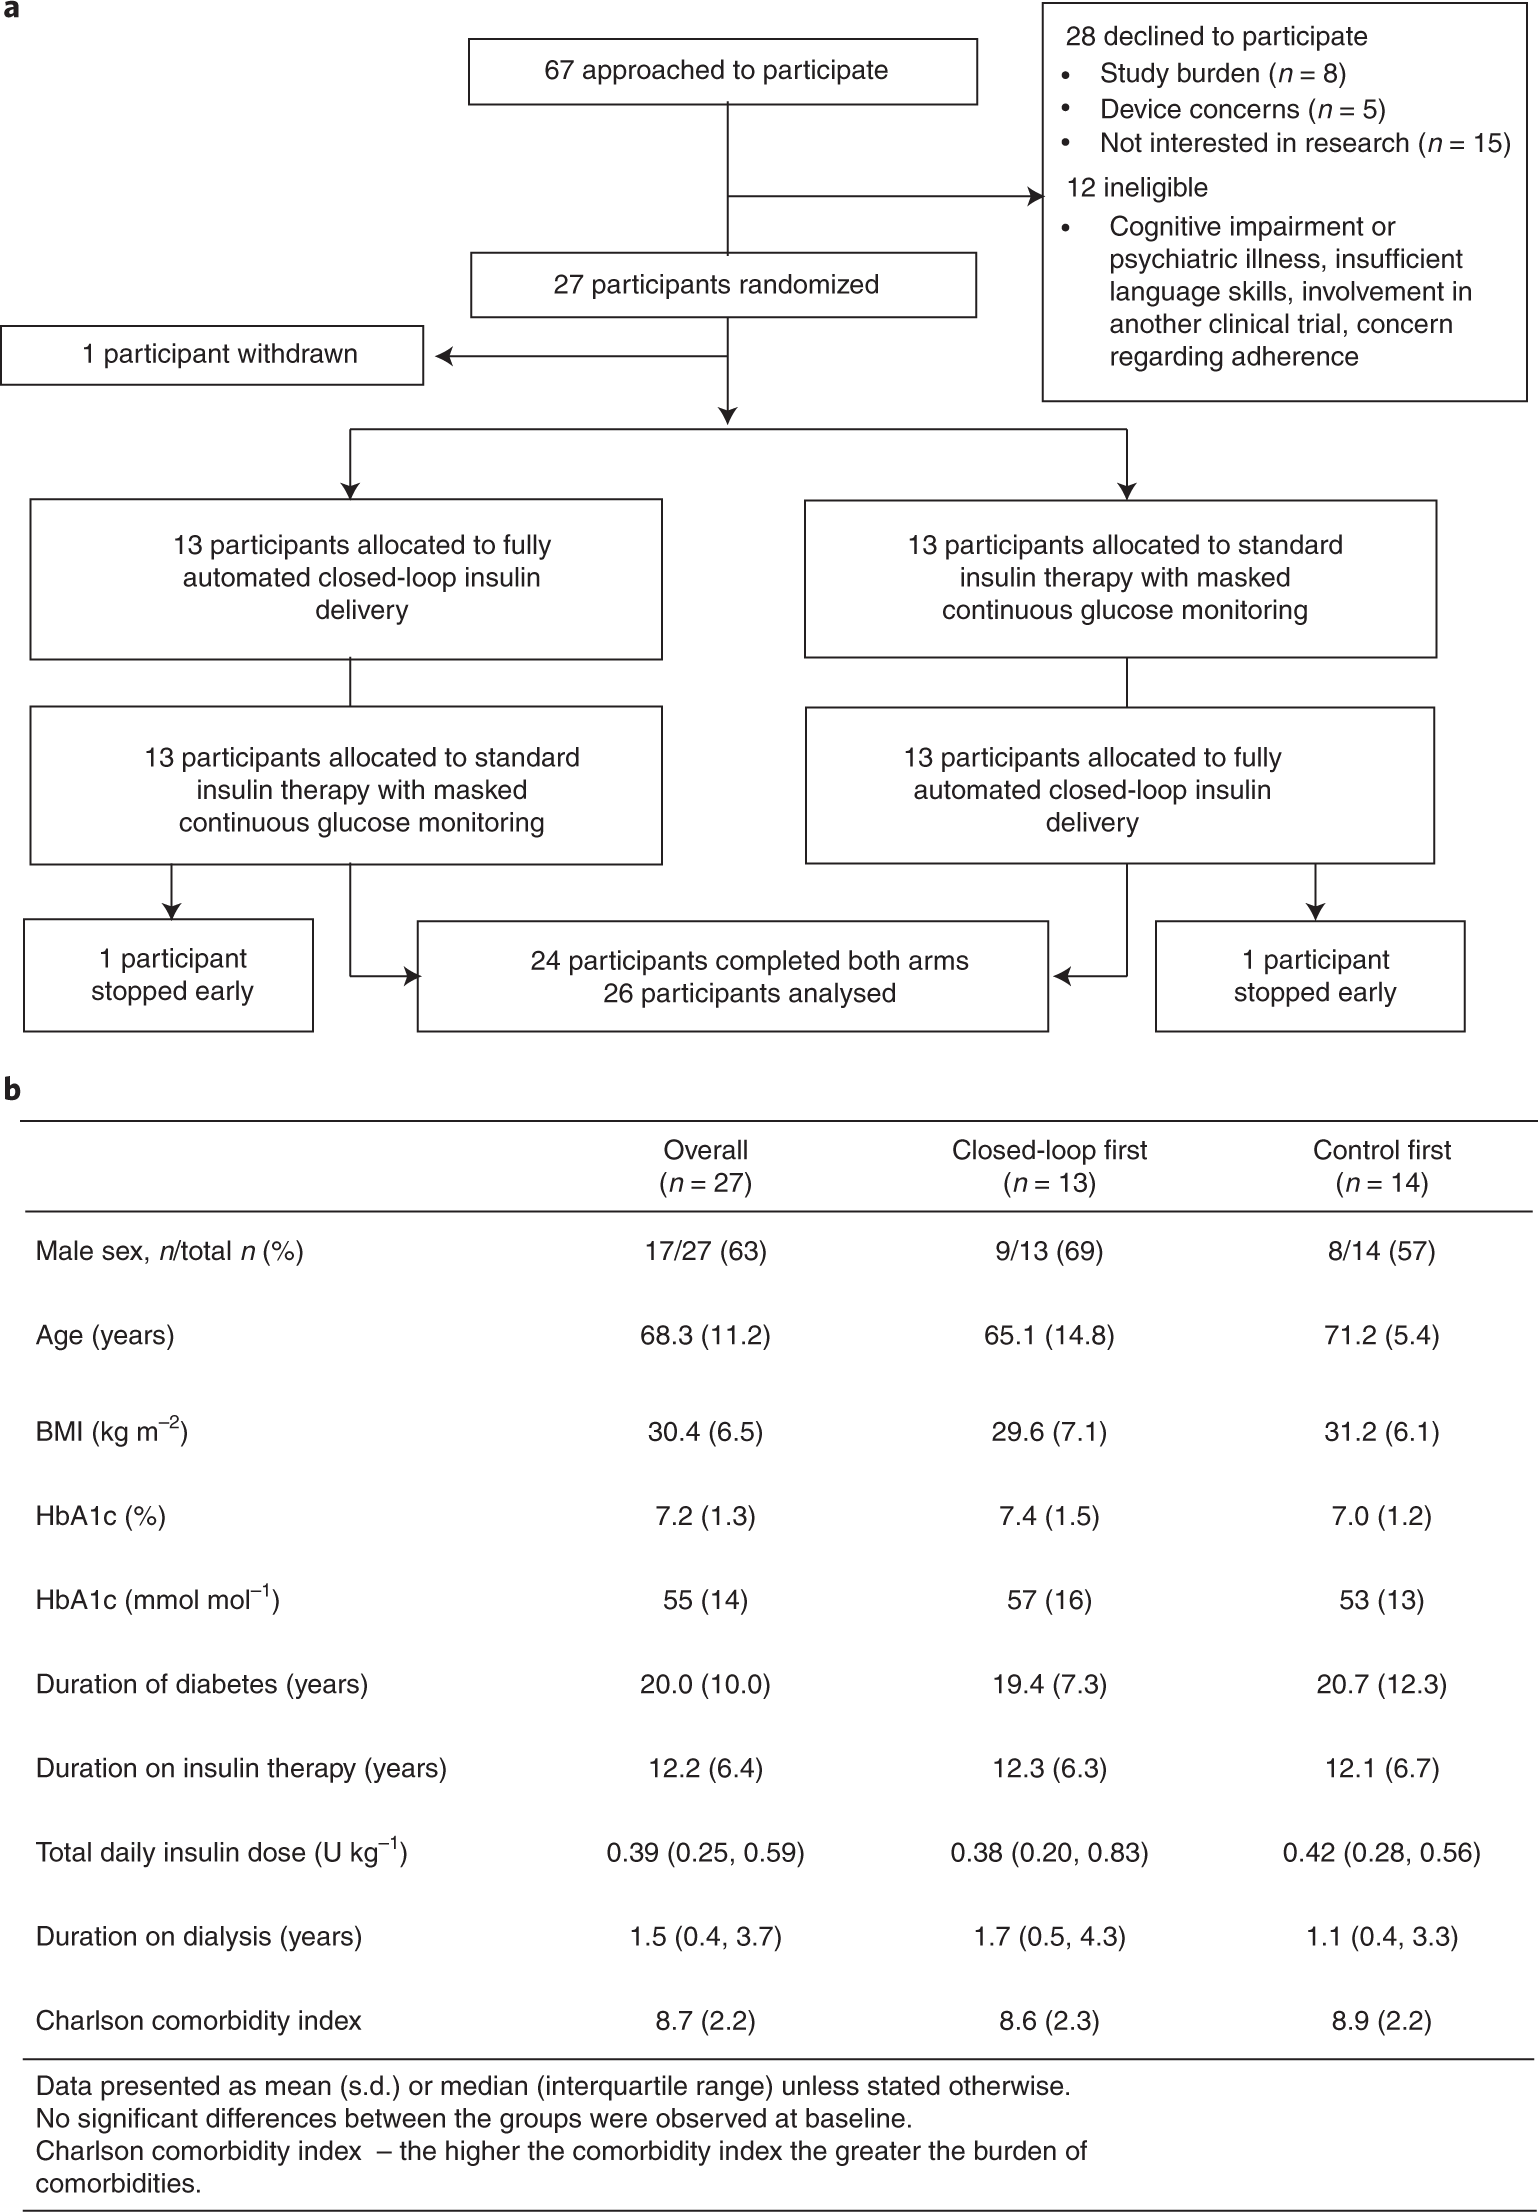 Fully automated closed-loop glucose control compared with standard therapy in adults with type 2 diabetes requiring dialysis: an open-label, randomized crossover | Nature Medicine